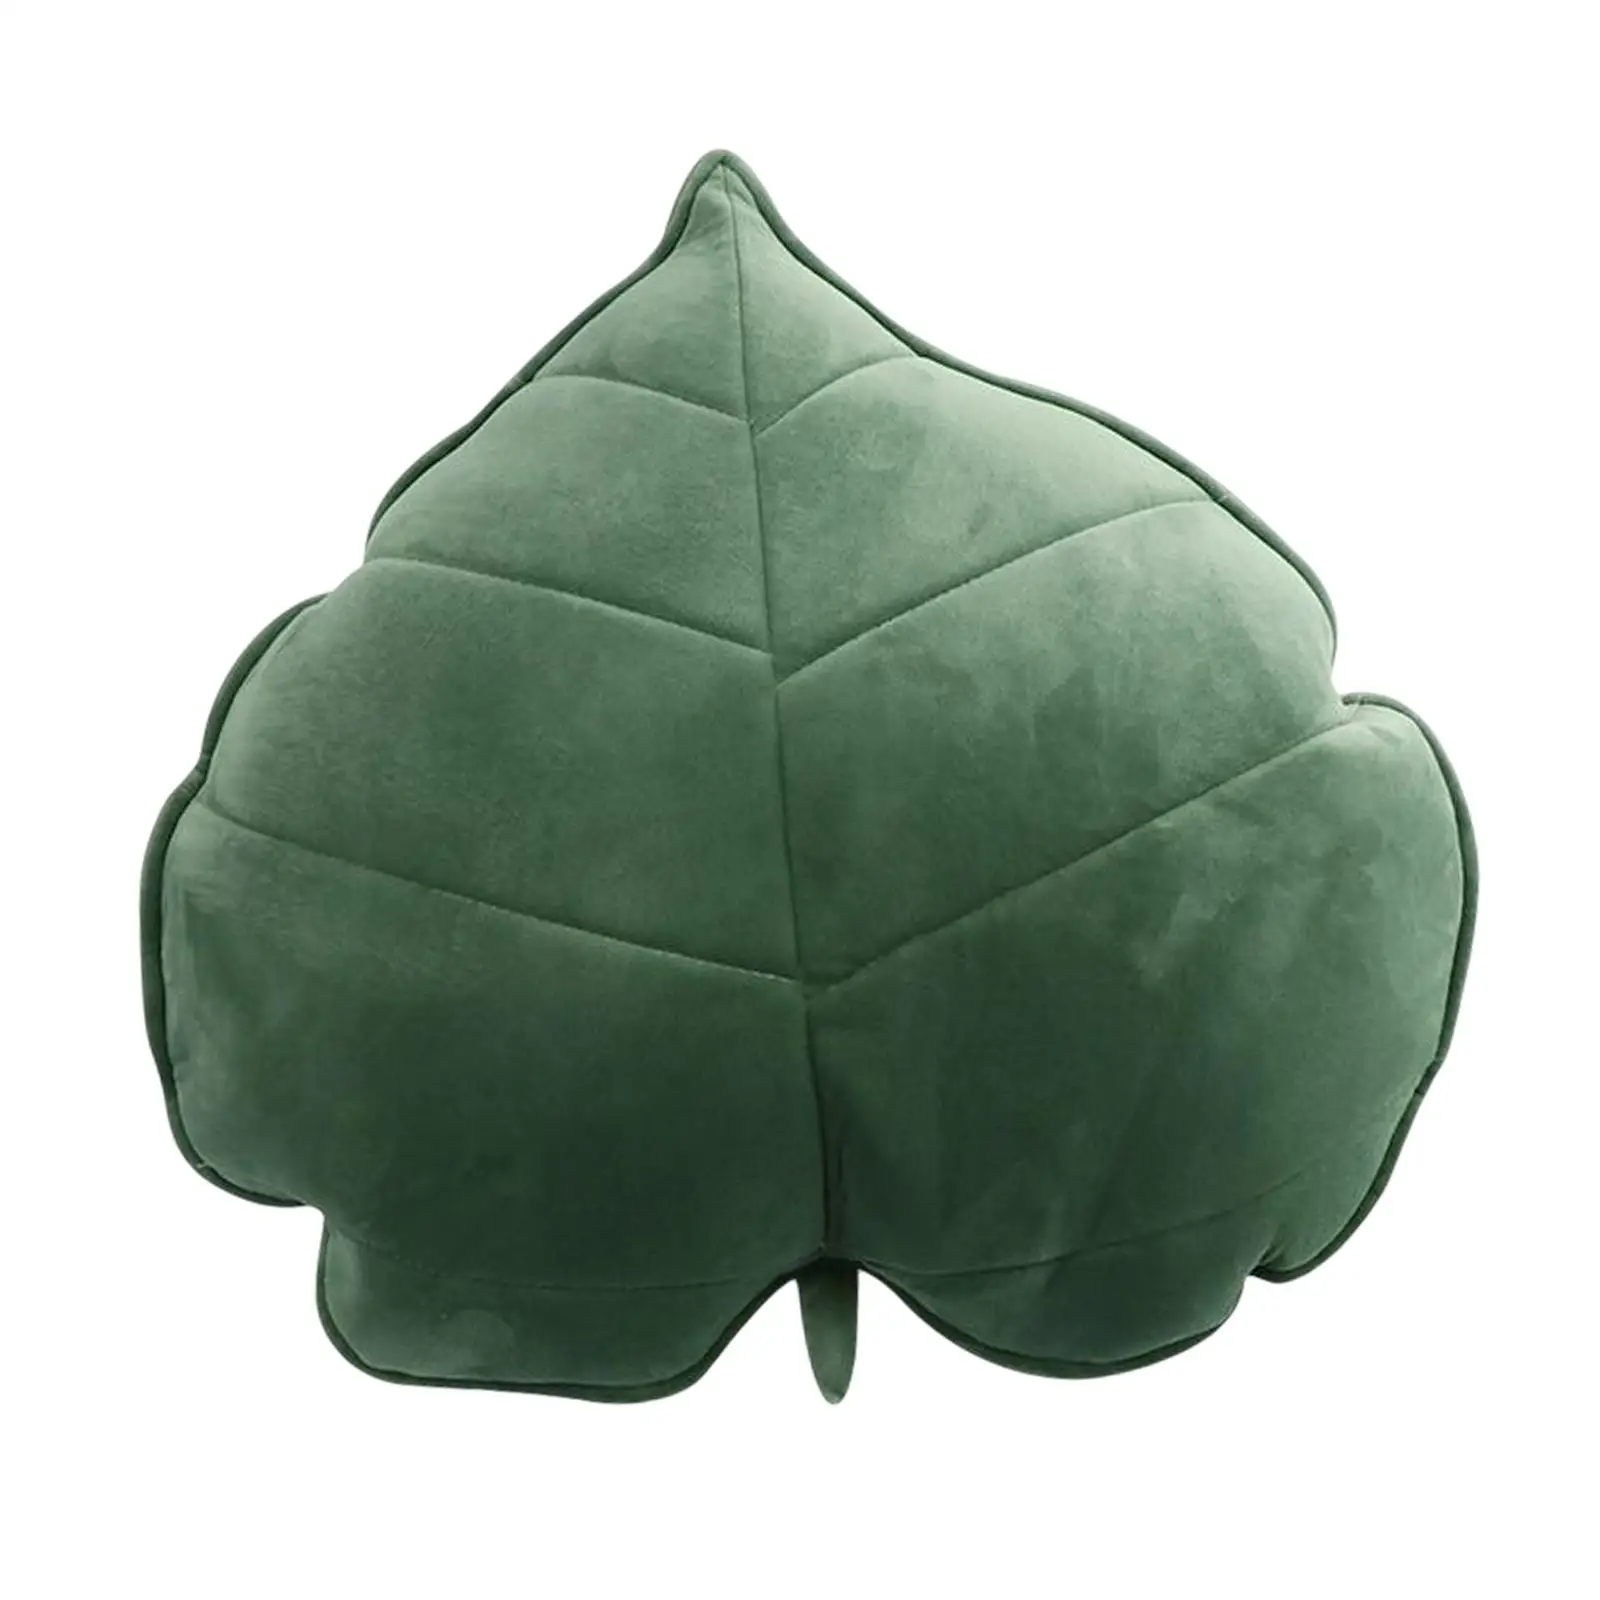 Cute Chair Cushion Plush Toy Soft and Comfortable Leaf Plush Hug Pillow for Children Room